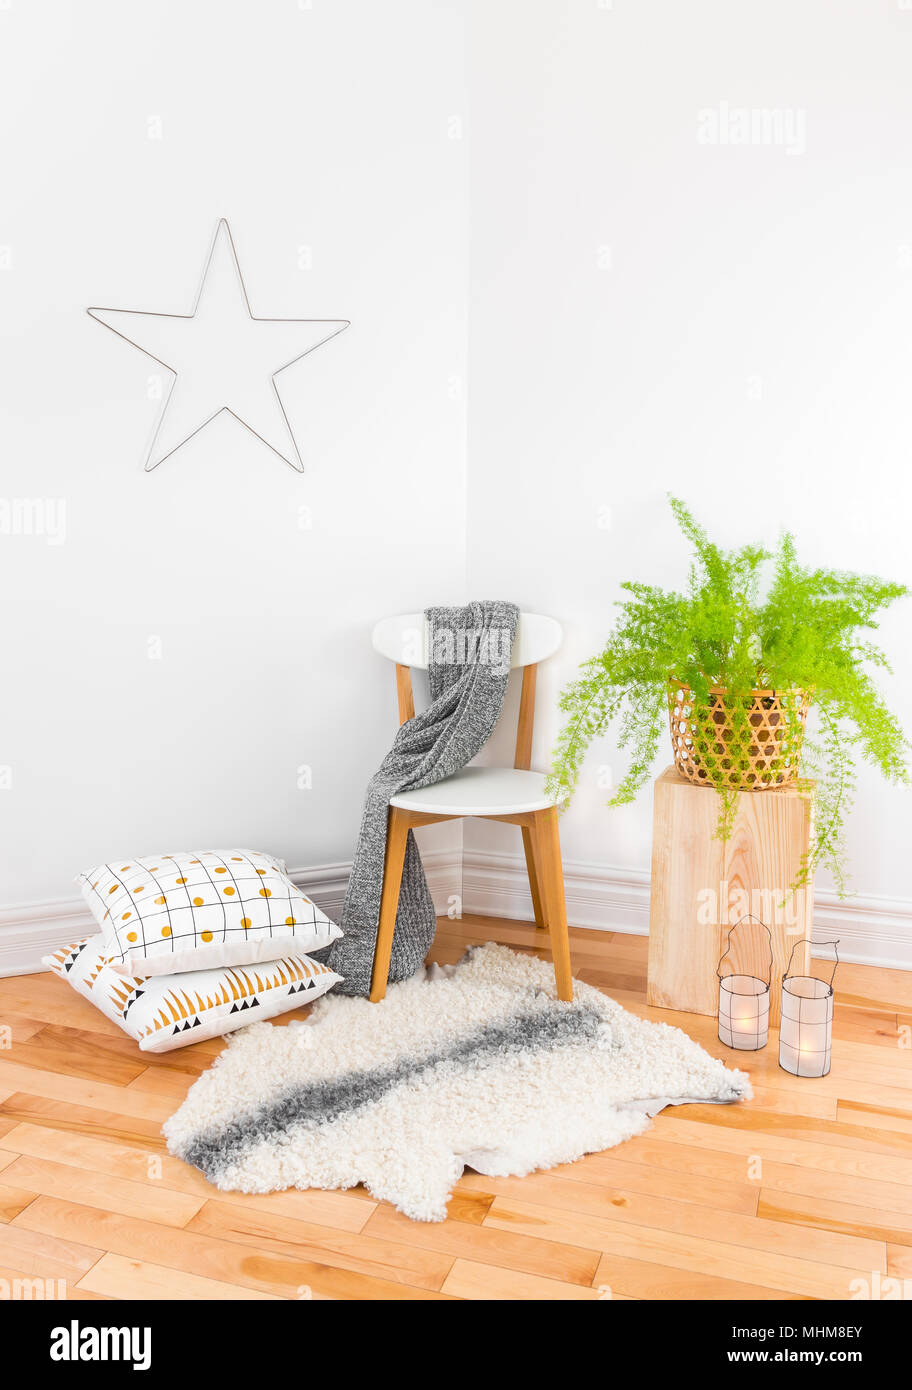 Beautiful home decor with cozy textiles and green plant, inspired by Scandinavian design. Stock Photo